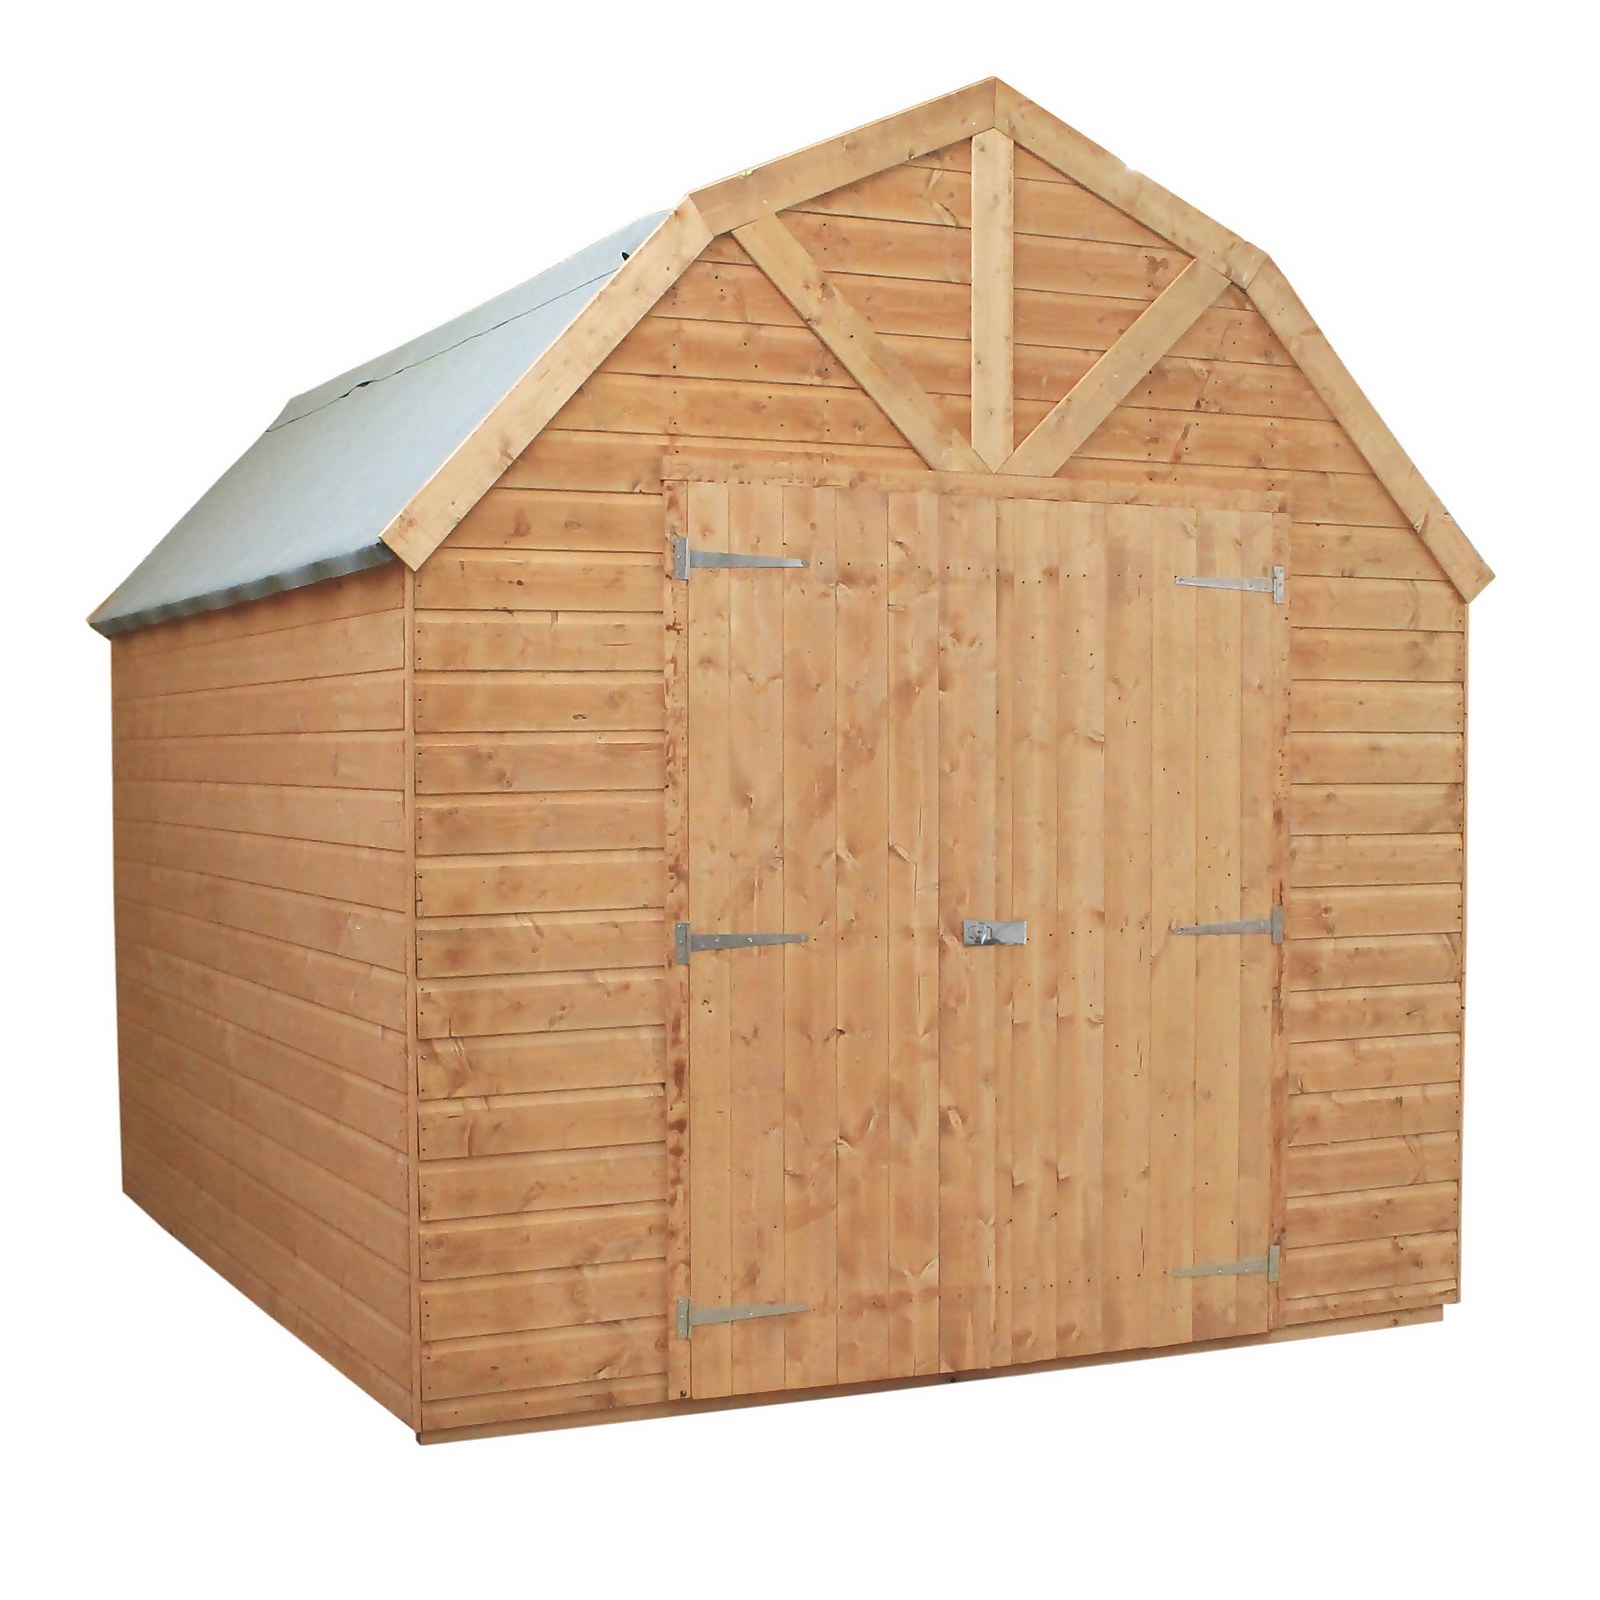 Mercia 10ft x 8ft Premium Shiplap Barn Shed - Including Installation